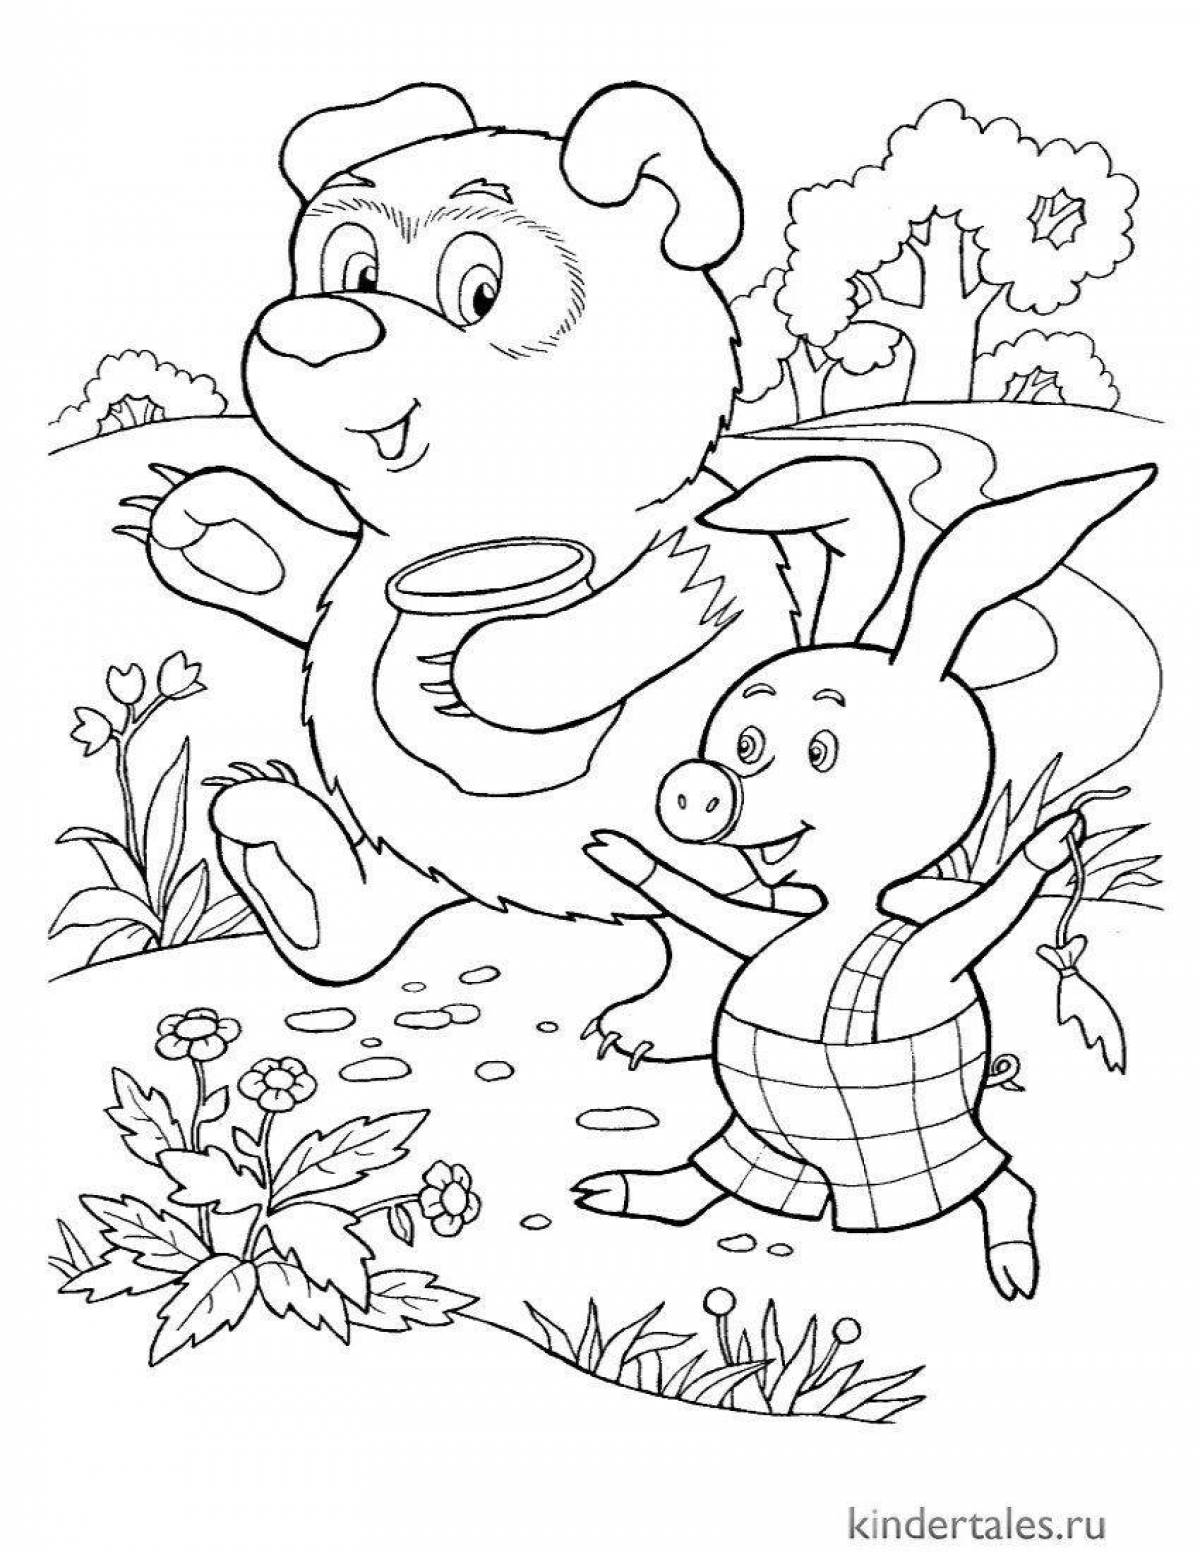 Colorful cartoon coloring book for kids